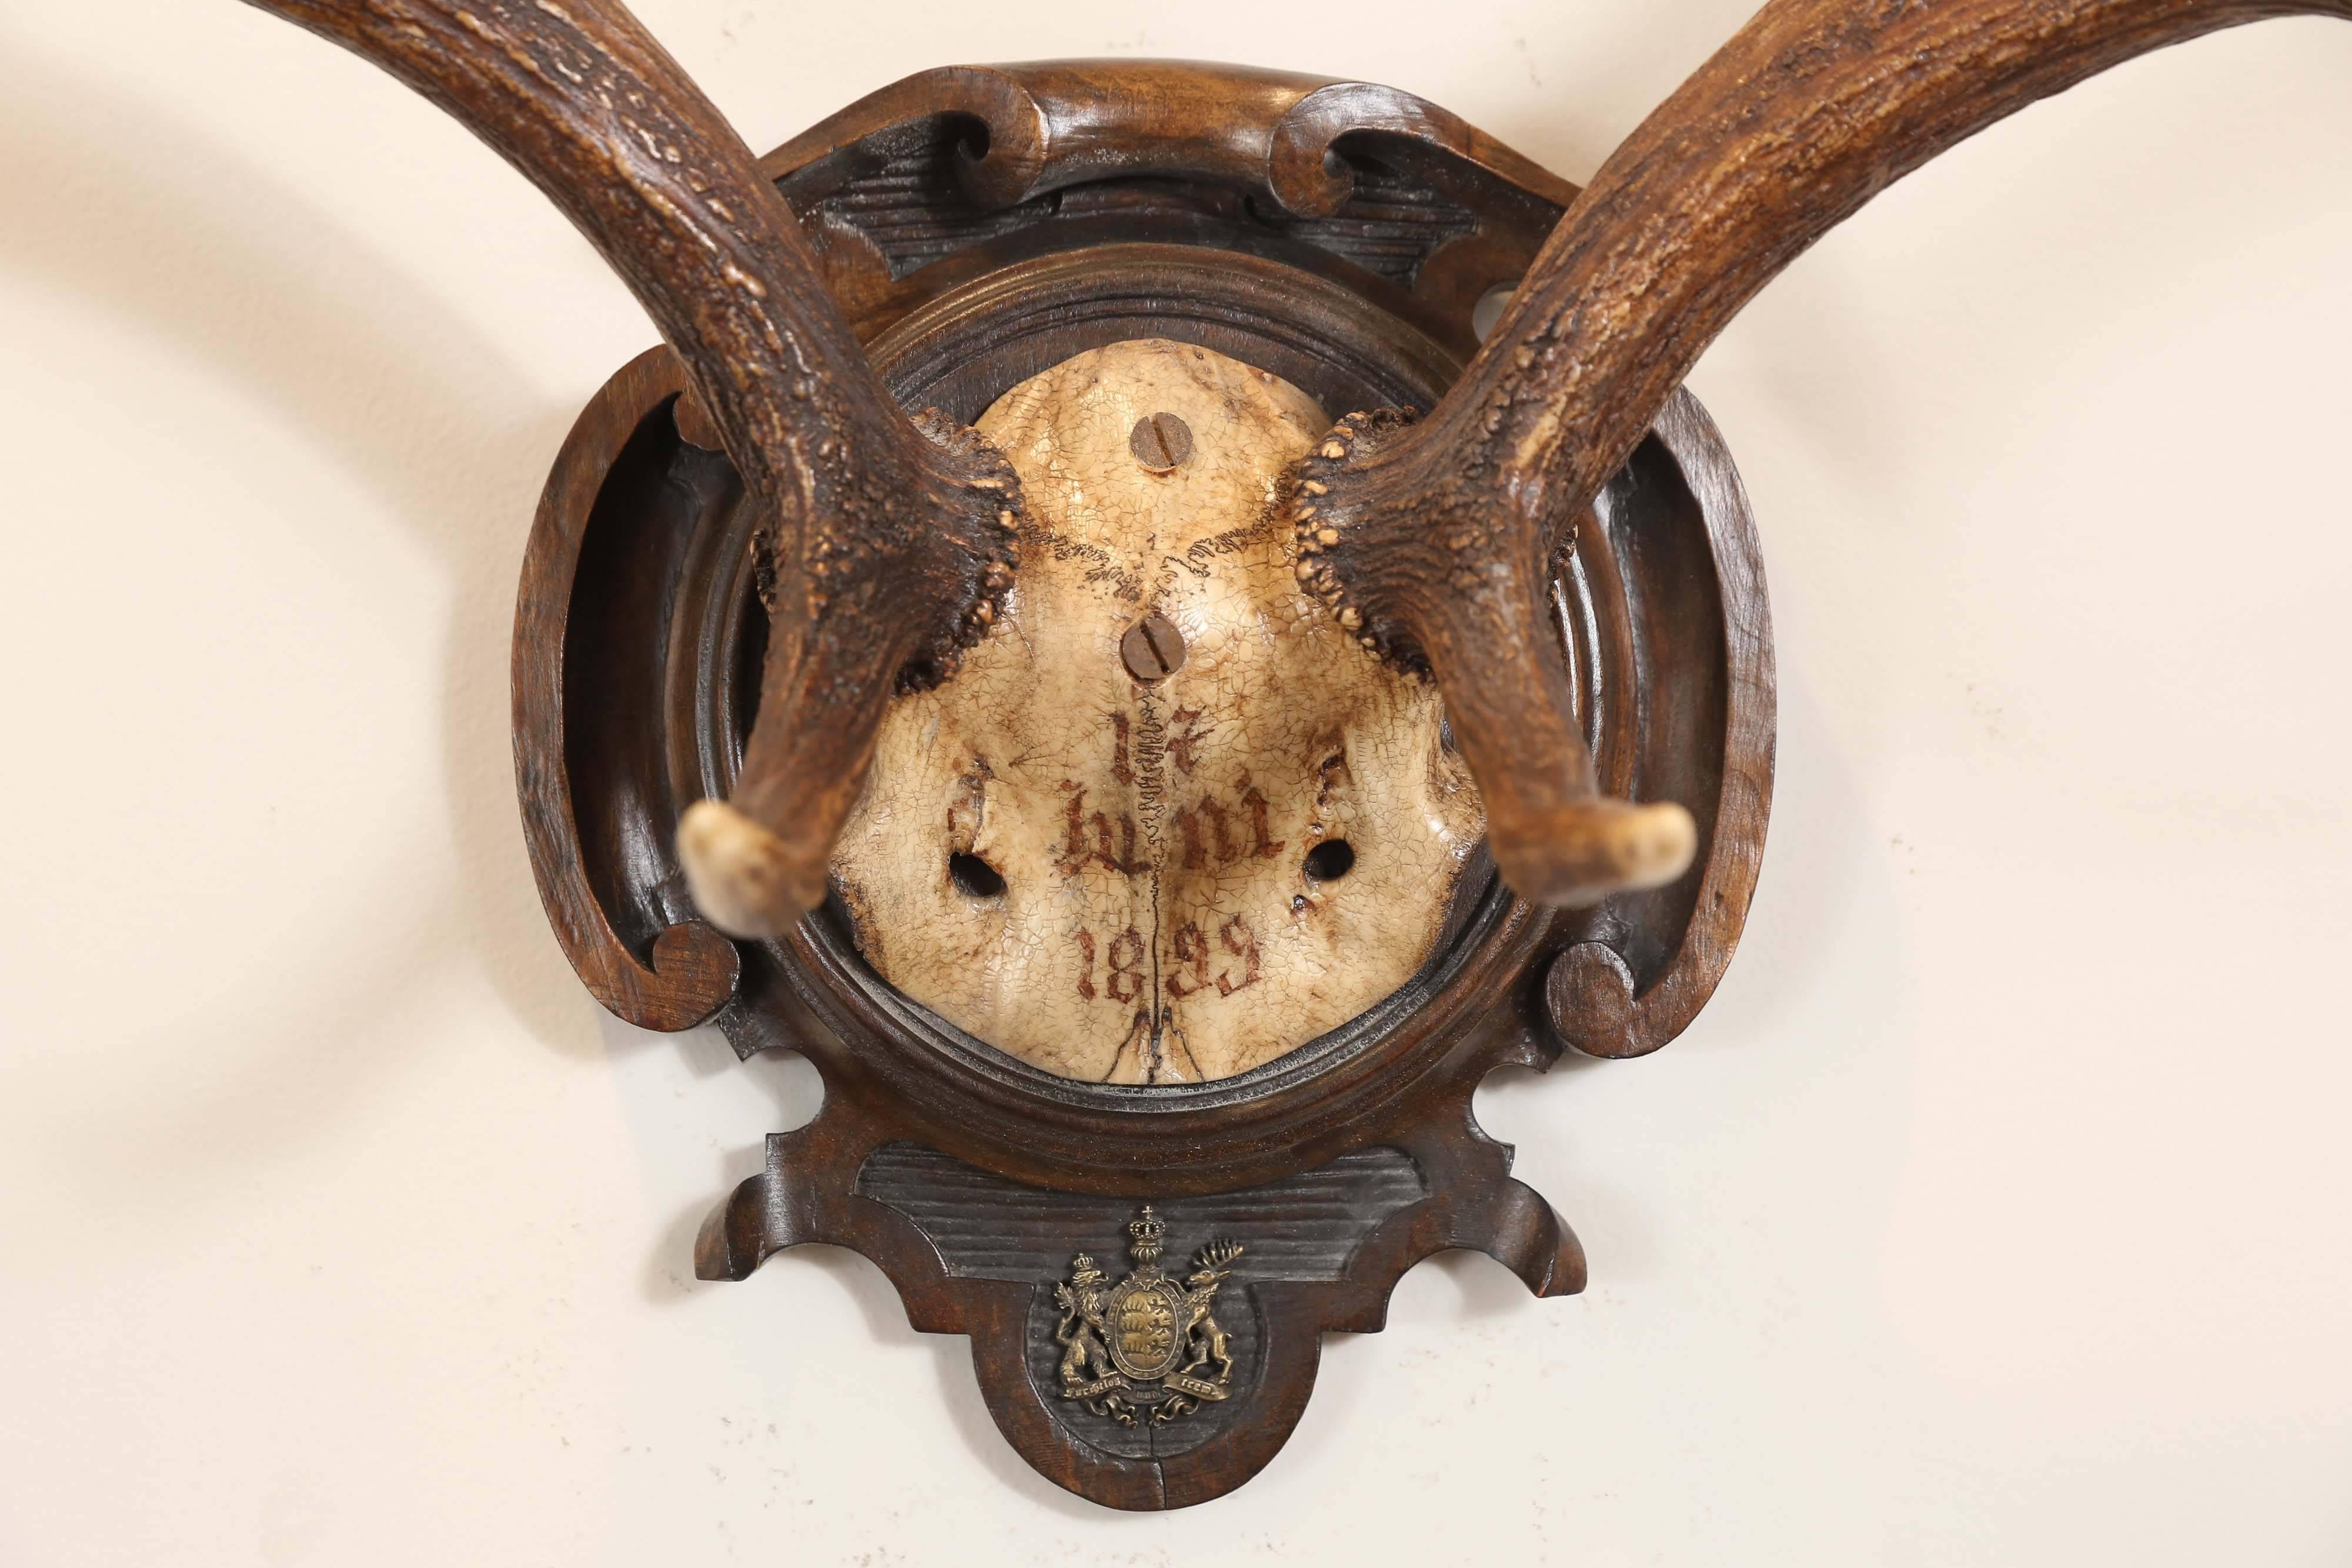 19th century fallow deer trophy from Emperor Franz Joseph's castle at Eckartsau in the Southern Austrian Alps, a favourite hunting schloss of the Habsburg Royal family. This historic hunting trophy features the original black forest carved plaque